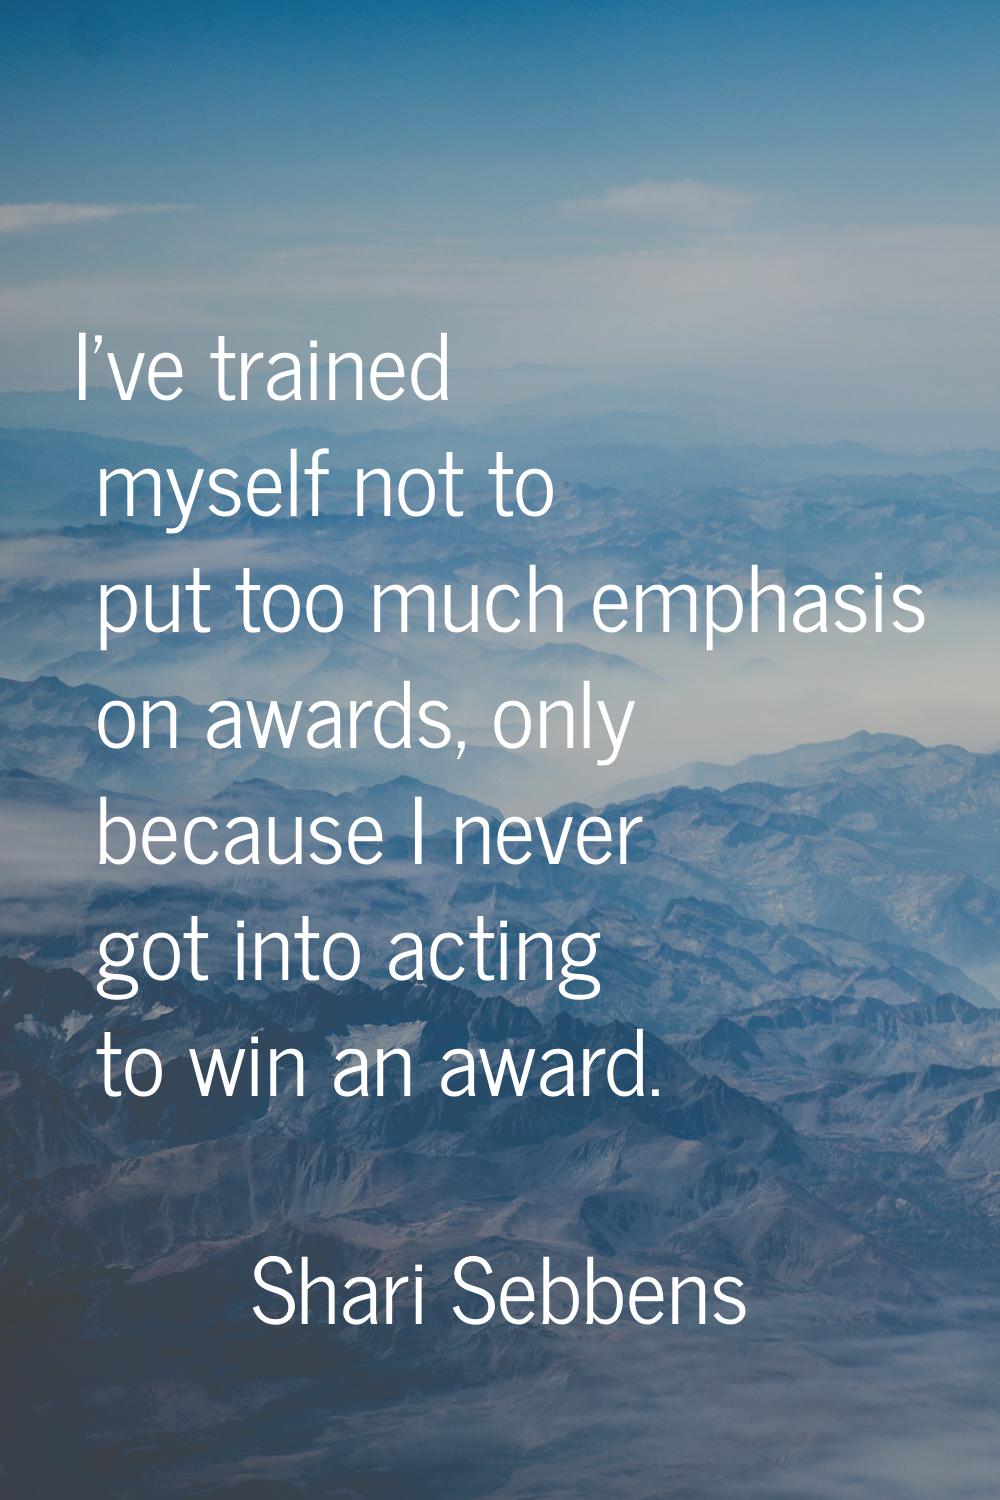 I've trained myself not to put too much emphasis on awards, only because I never got into acting to